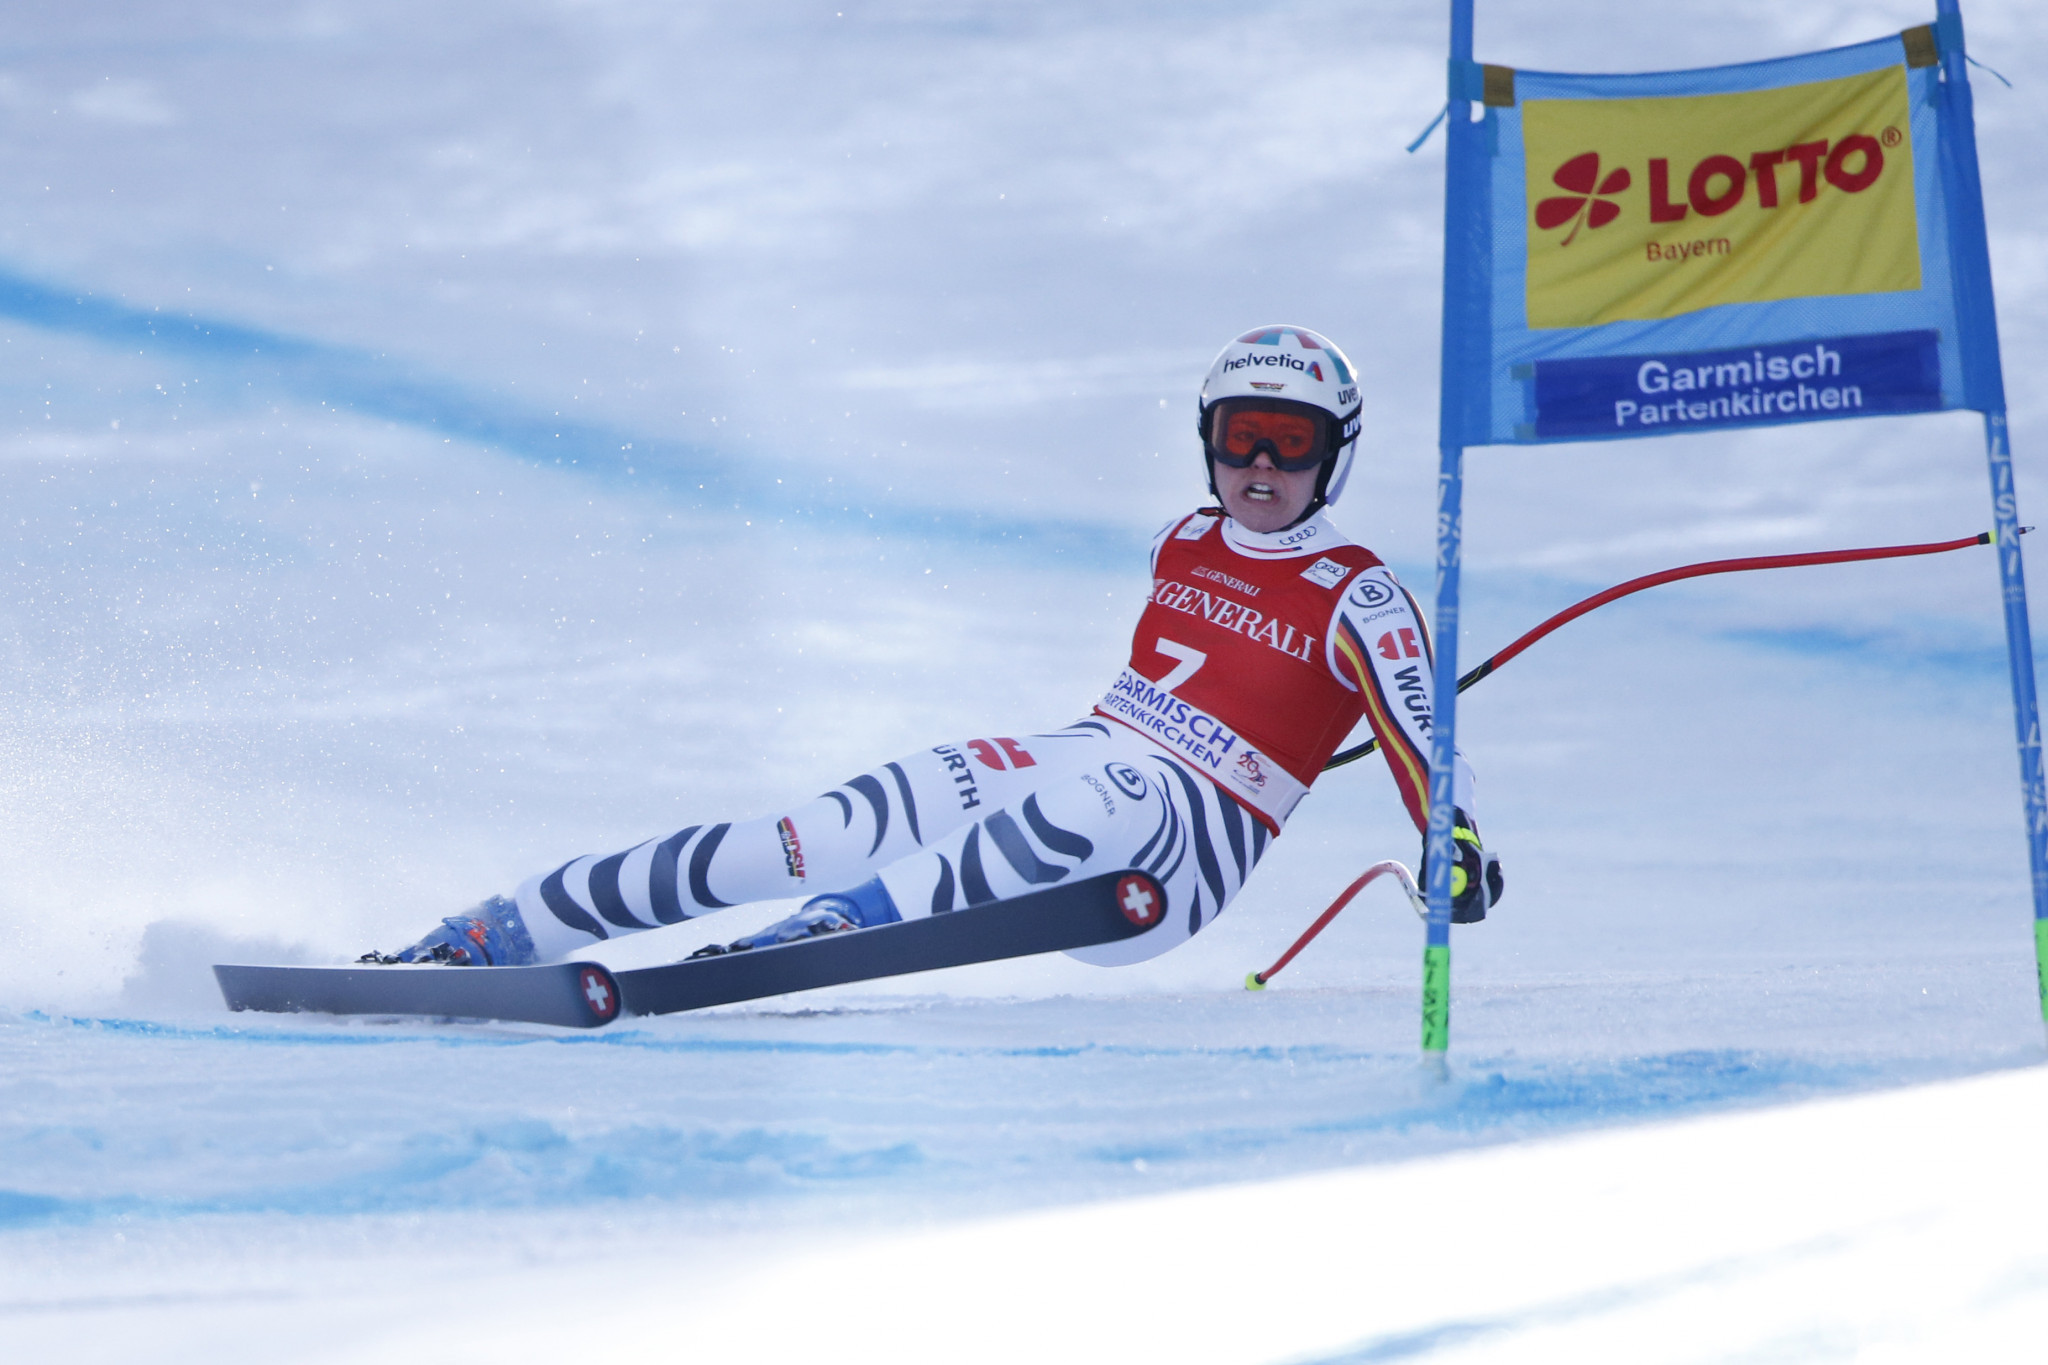 A fractured tibia has brought a premature end to Viktoria Rebensburg's season ©Getty Images